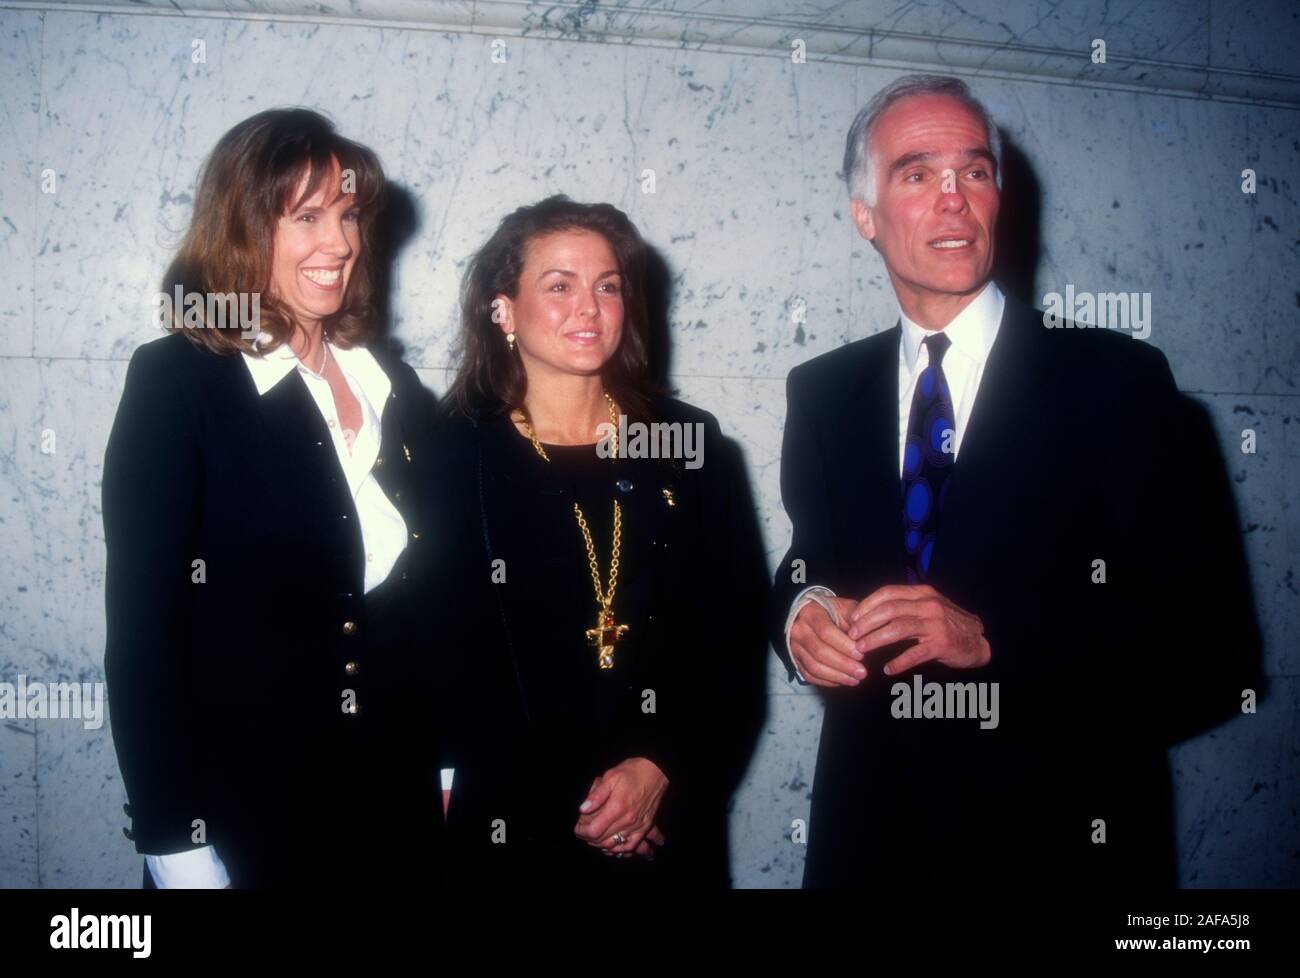 Los Angeles, California, USA 31st March 1995 Tanya Brown, Dominique Brown and attorney Gil Garcetti attend 'Assassins' Premiere on March 31, 1995 at the Los Angeles Theatre Center in Los Angeles, California, USA. Photo by Barry King/Alamy Stock Photo Stock Photo